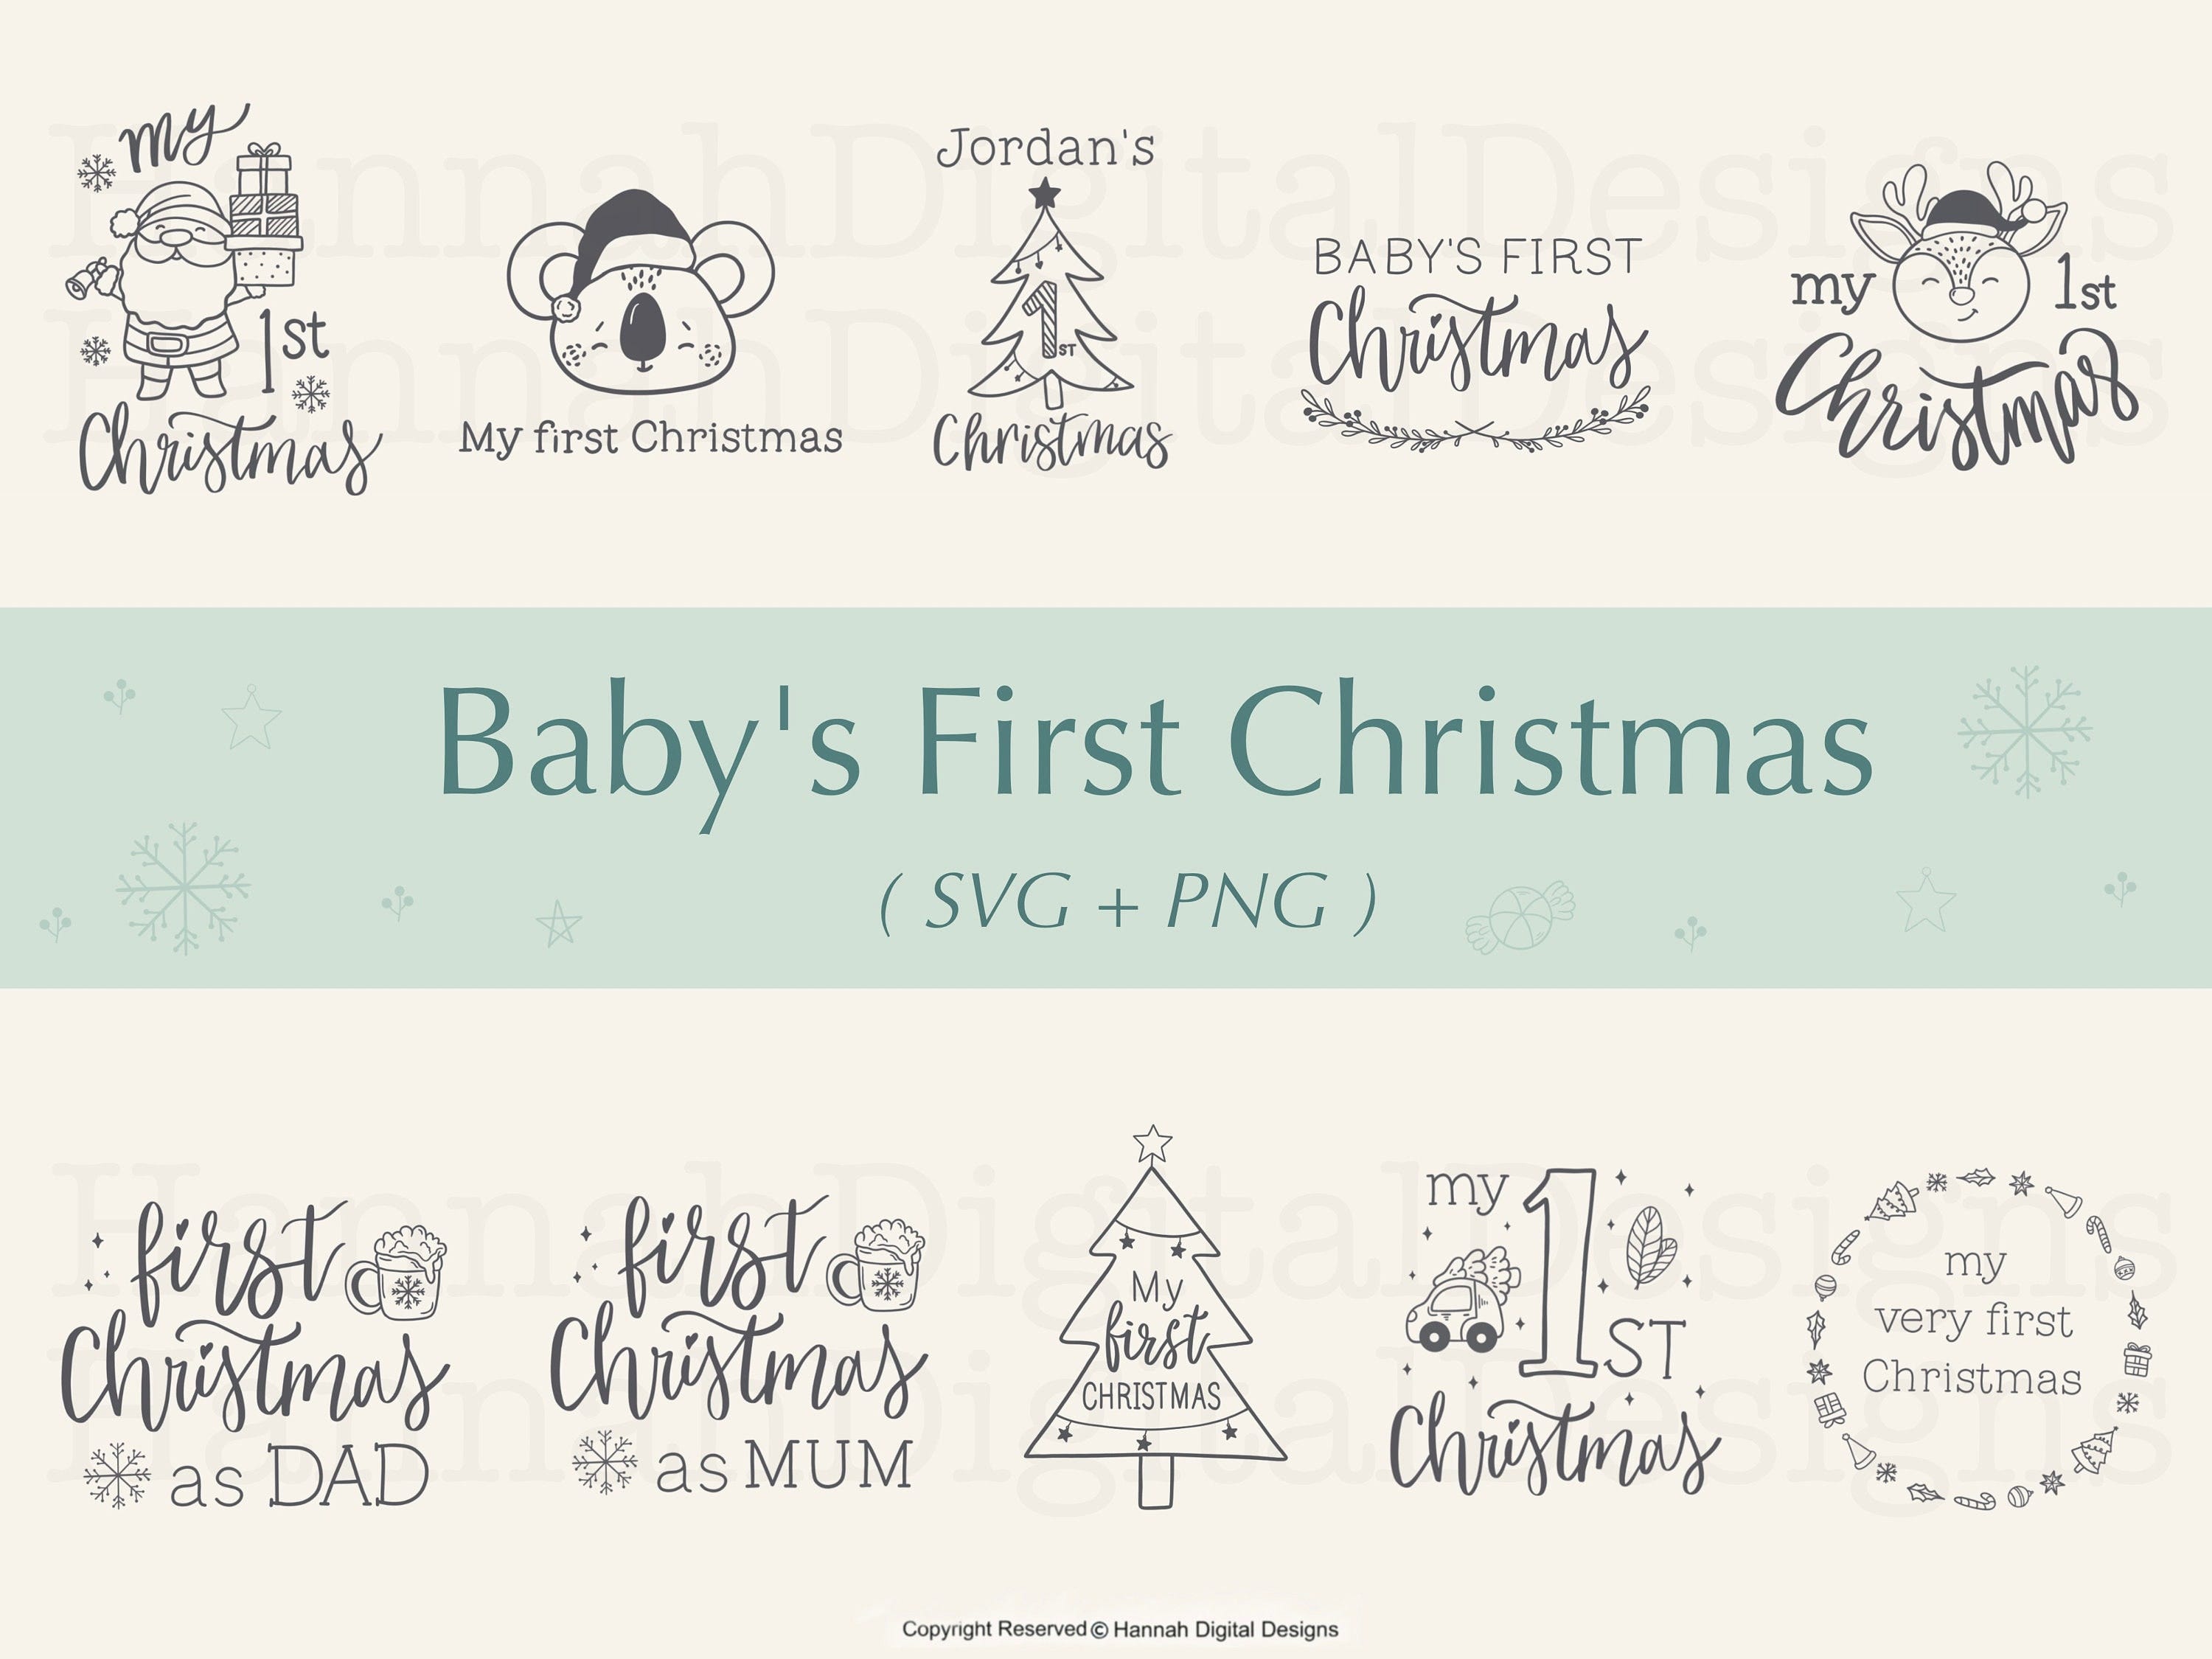 Baby’s first Christmas svg bundle | My first Christmas svg | First Christmas svg | baby’s first Christmas svg | ornament svg | svg files